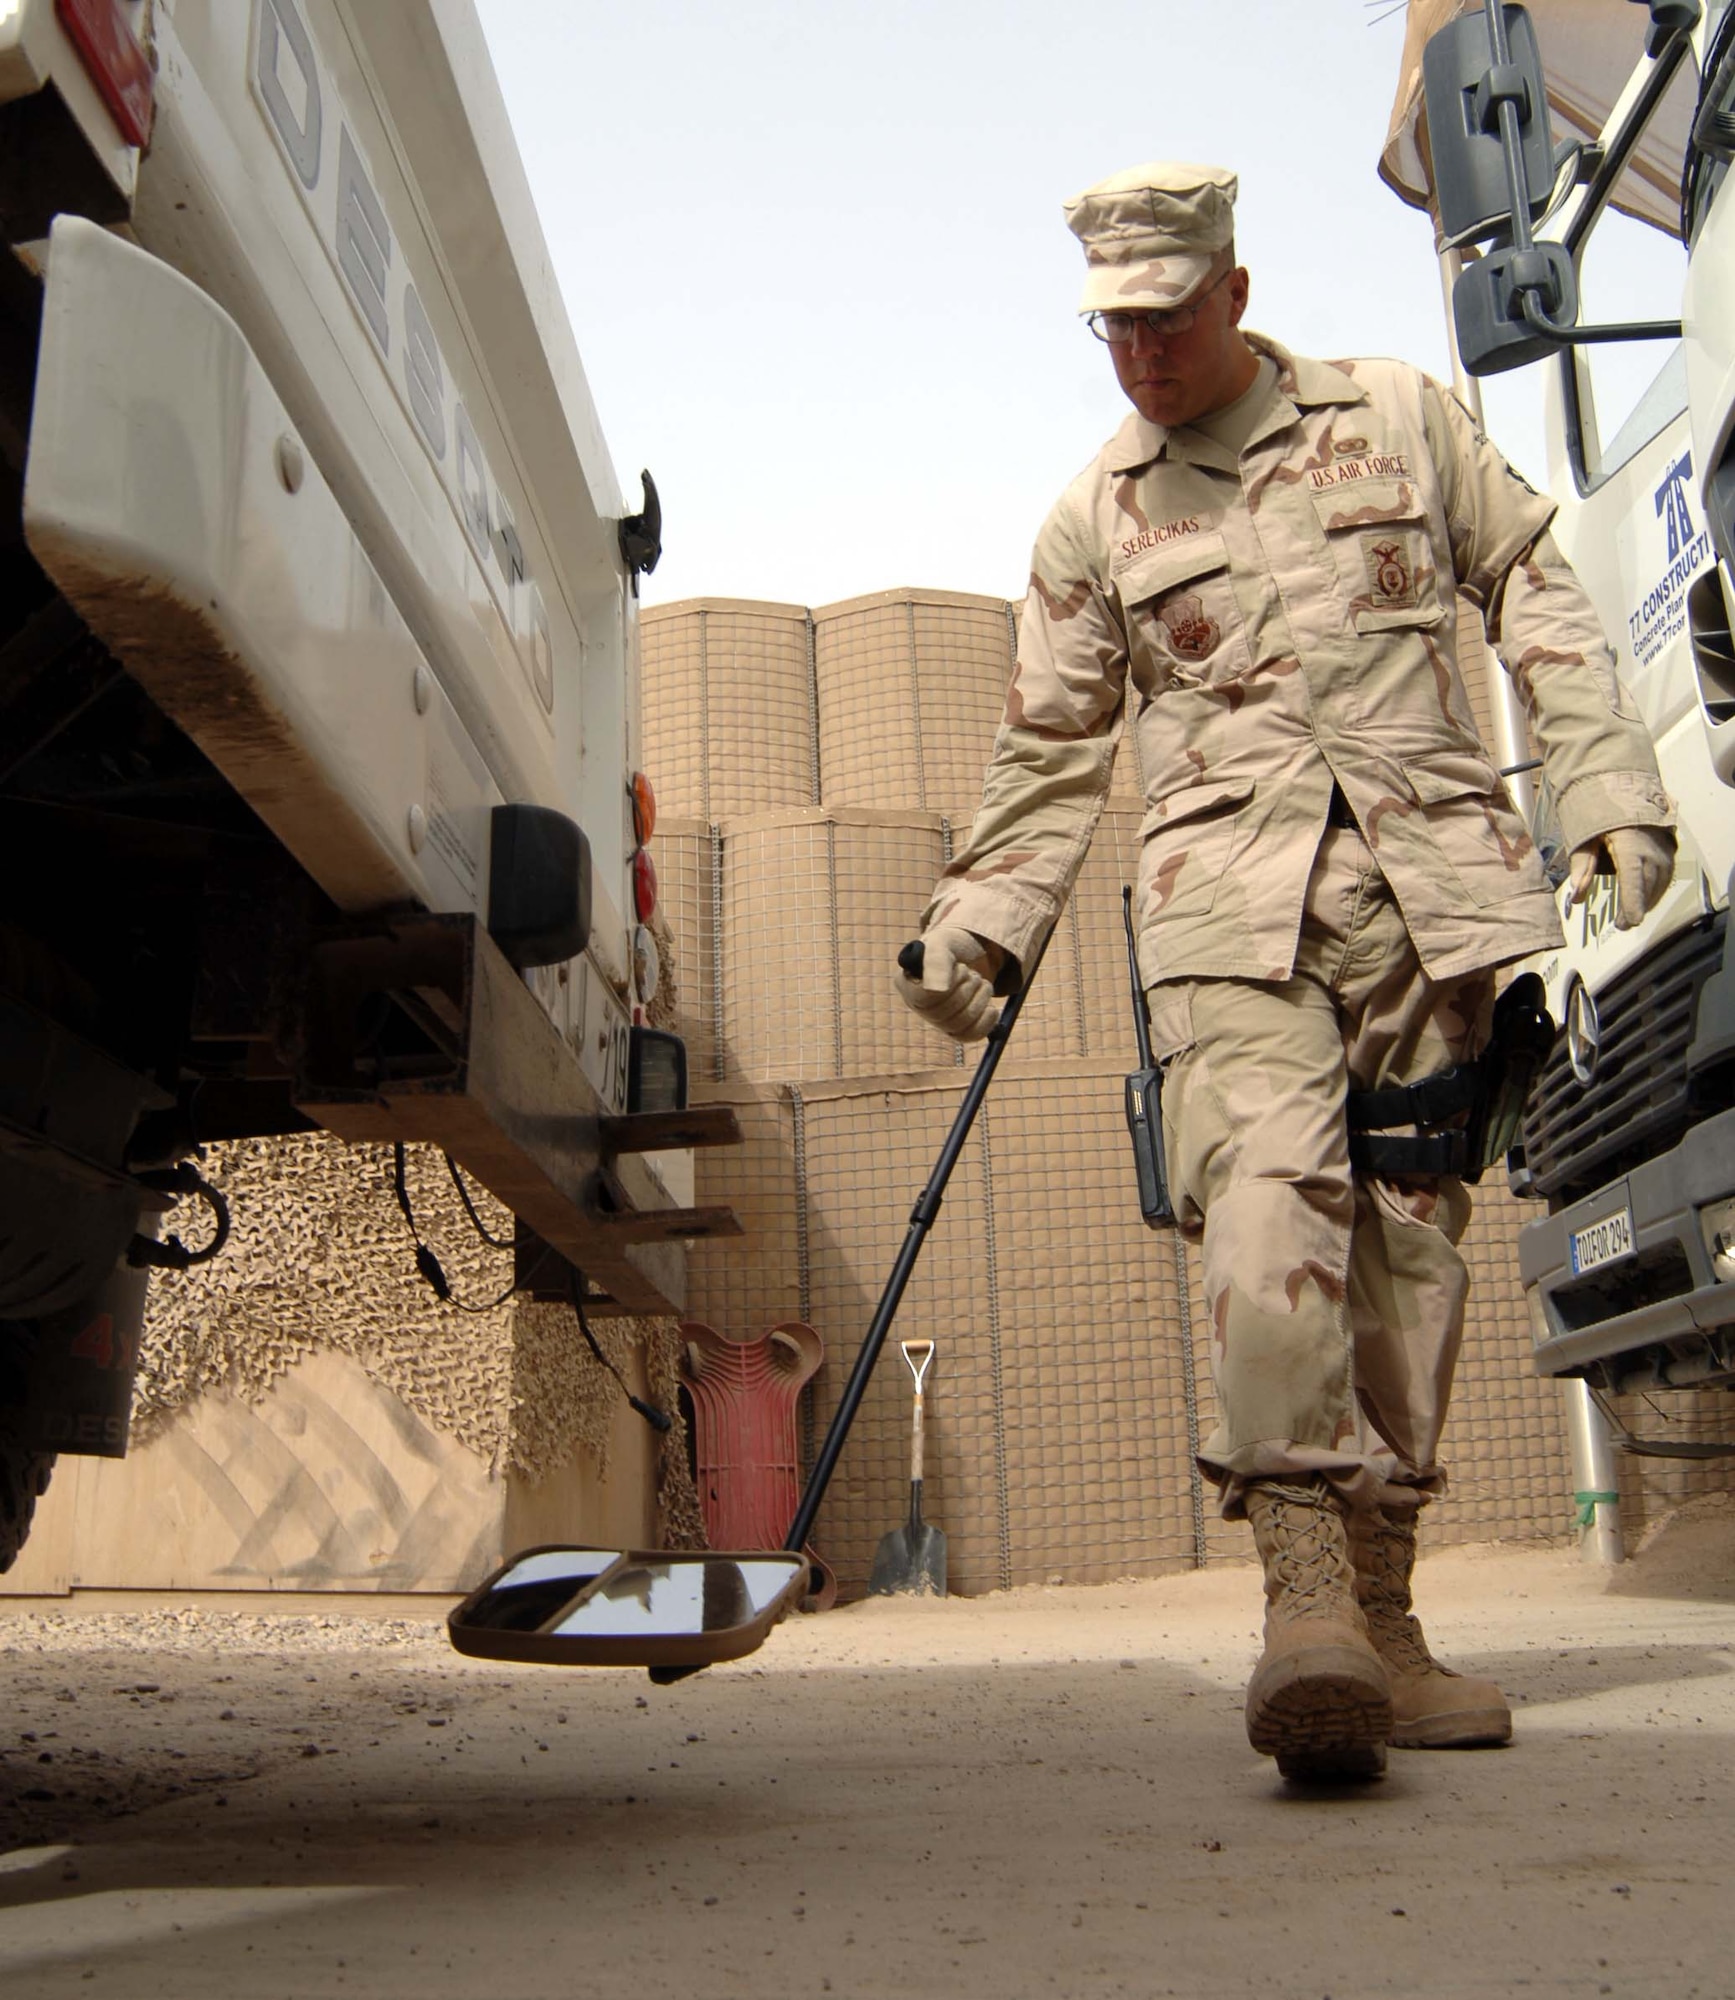 SATHER AIR BASE, Iraq - Senior Airman Felix Sereicikas, 447th Expeditionary Security Forces Squadron, searches for suspicious items in the undercarriage of a truck at the Sierra-three Search Pit on the north end of Sather. Also known as the “Scorpion Pit” the security forces Airmen assigned there process more than 600 vehicles and 2,000 people weekly. (U.S. Air Force photo/Tech. Sgt. Russell Wicke)